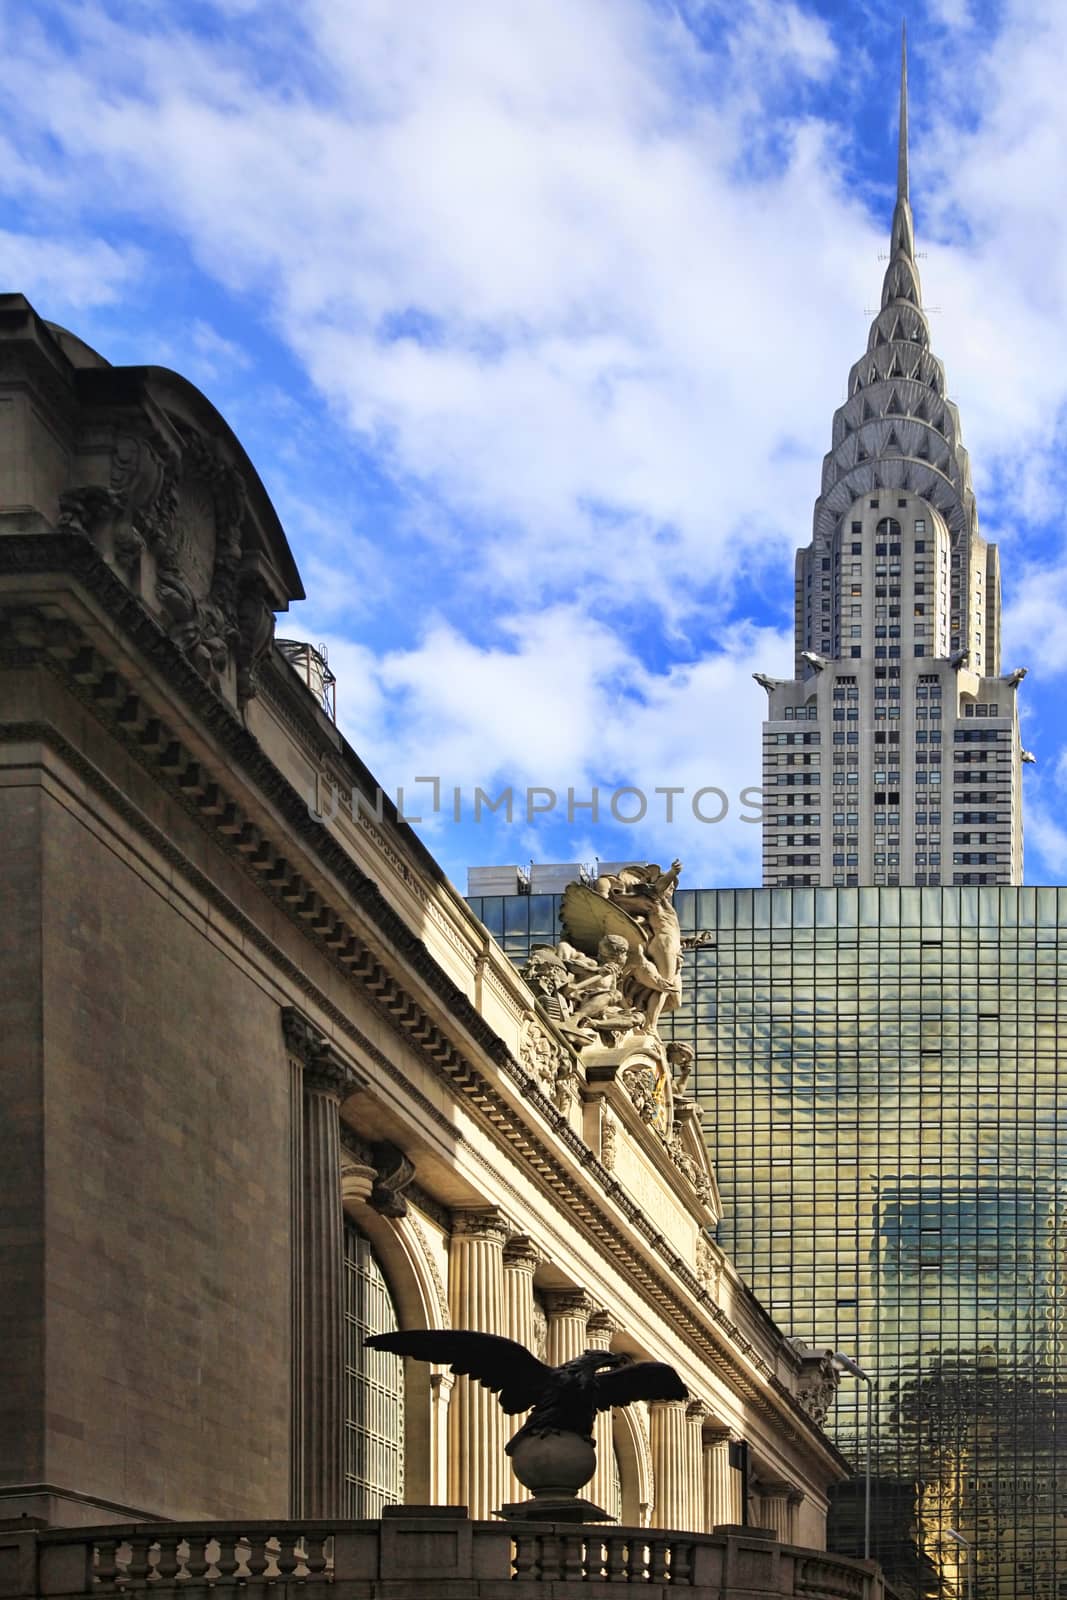 New York, USA - October 12, 2012: Corinthian style sculpture on Grand Central Terminal in New York City. Grand Central Terminal is the busiest train station in the United States.